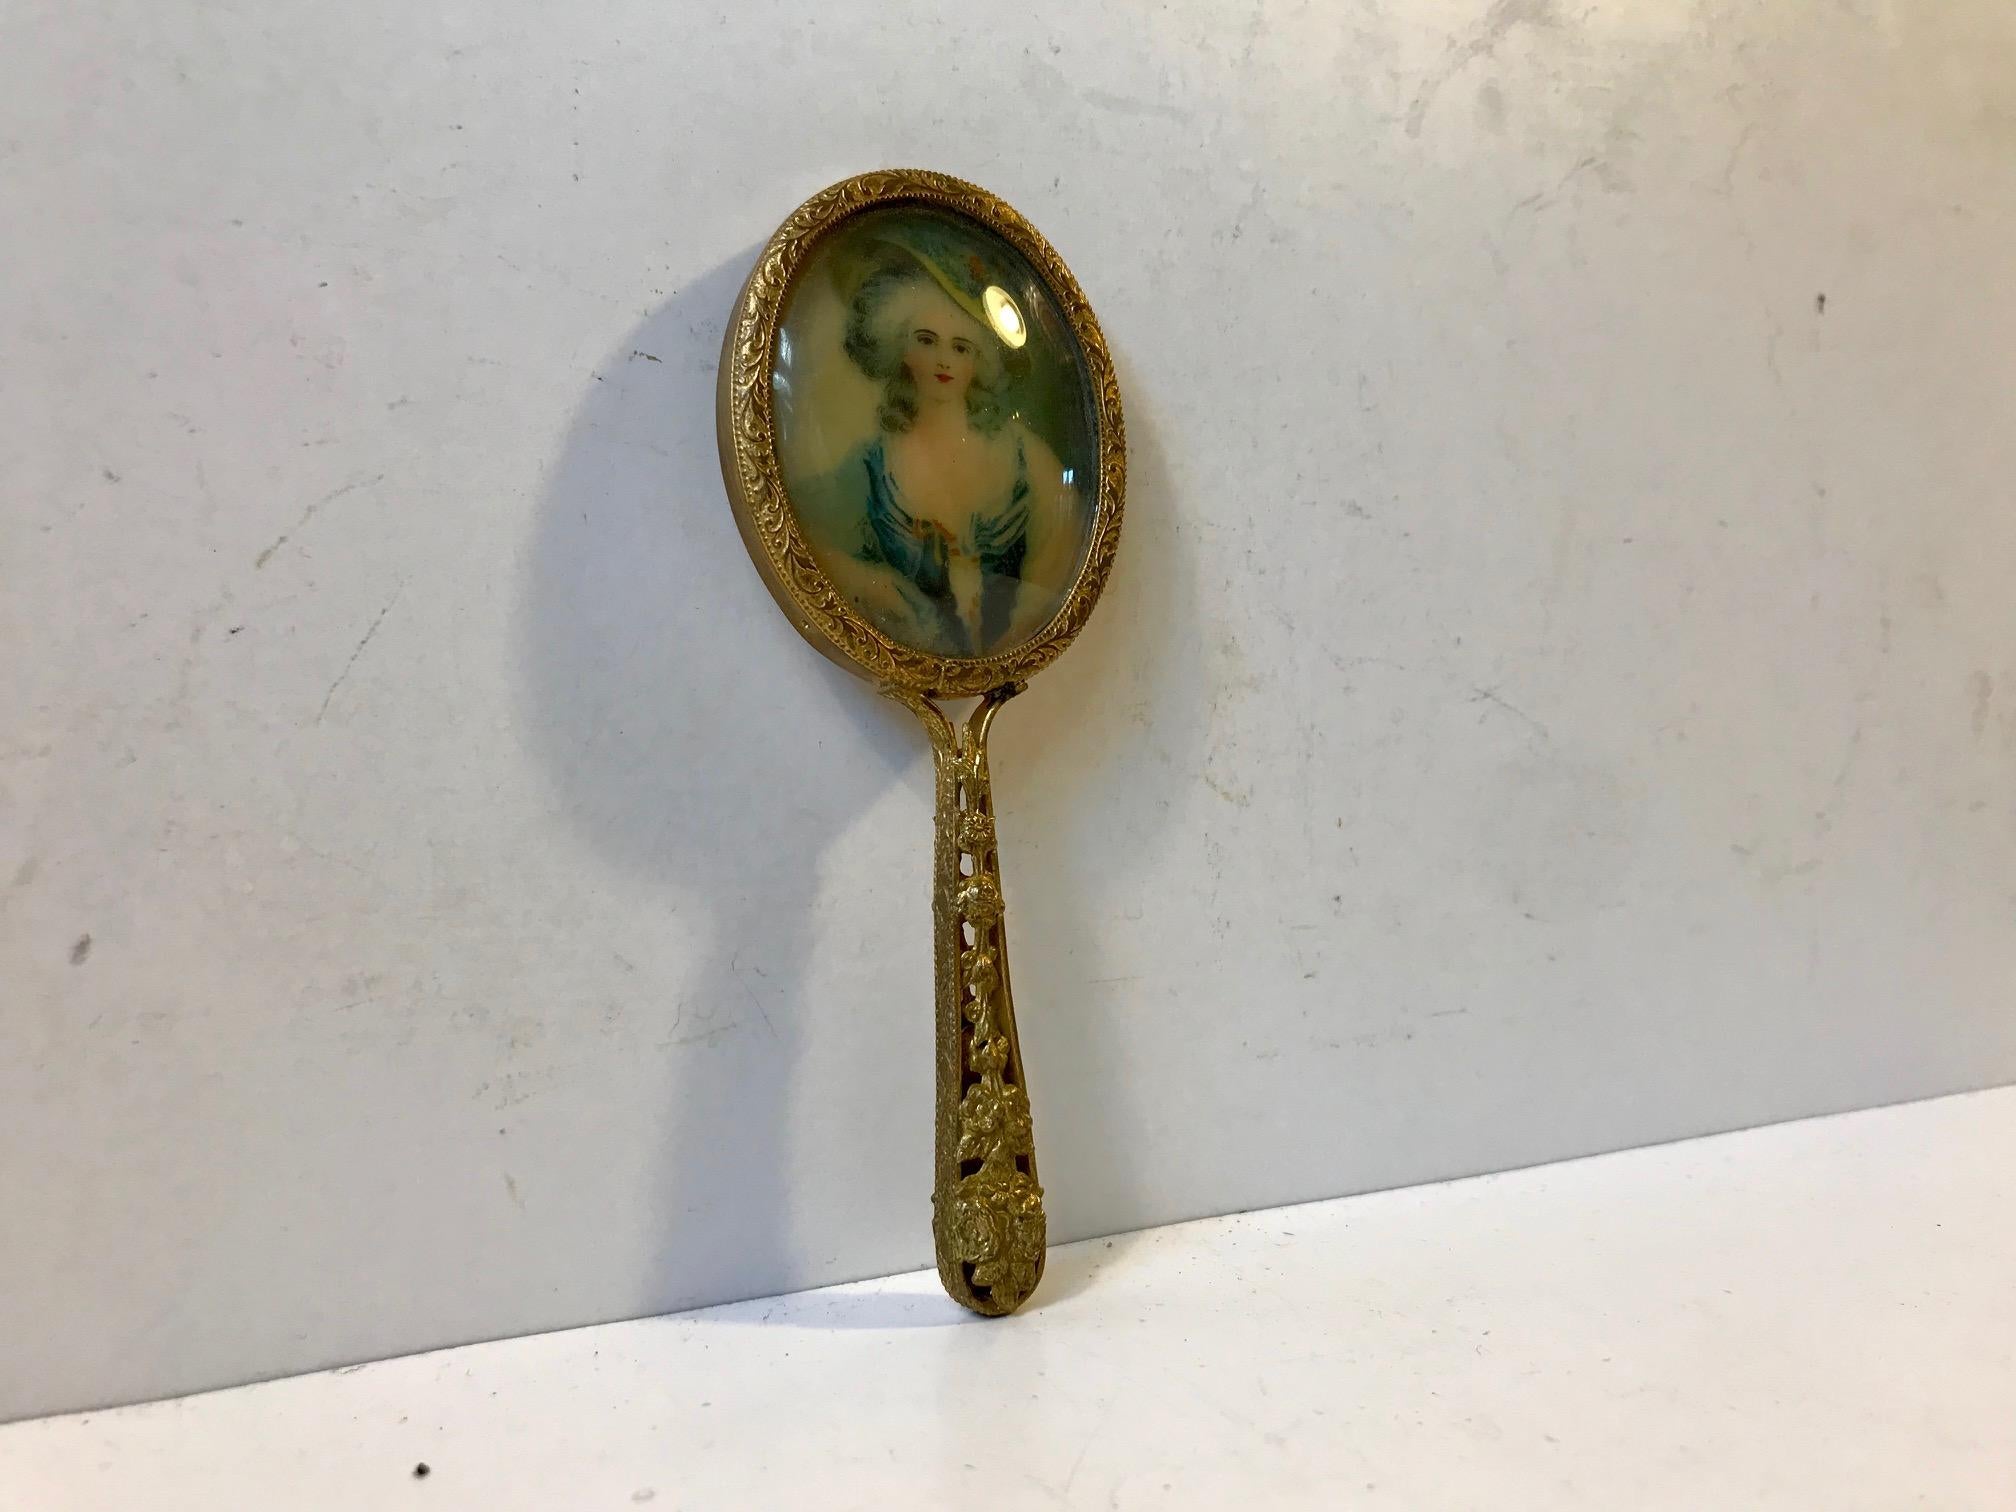 Petite Antique French Hand Mirror with Miniature Portrait, 19th Century 1